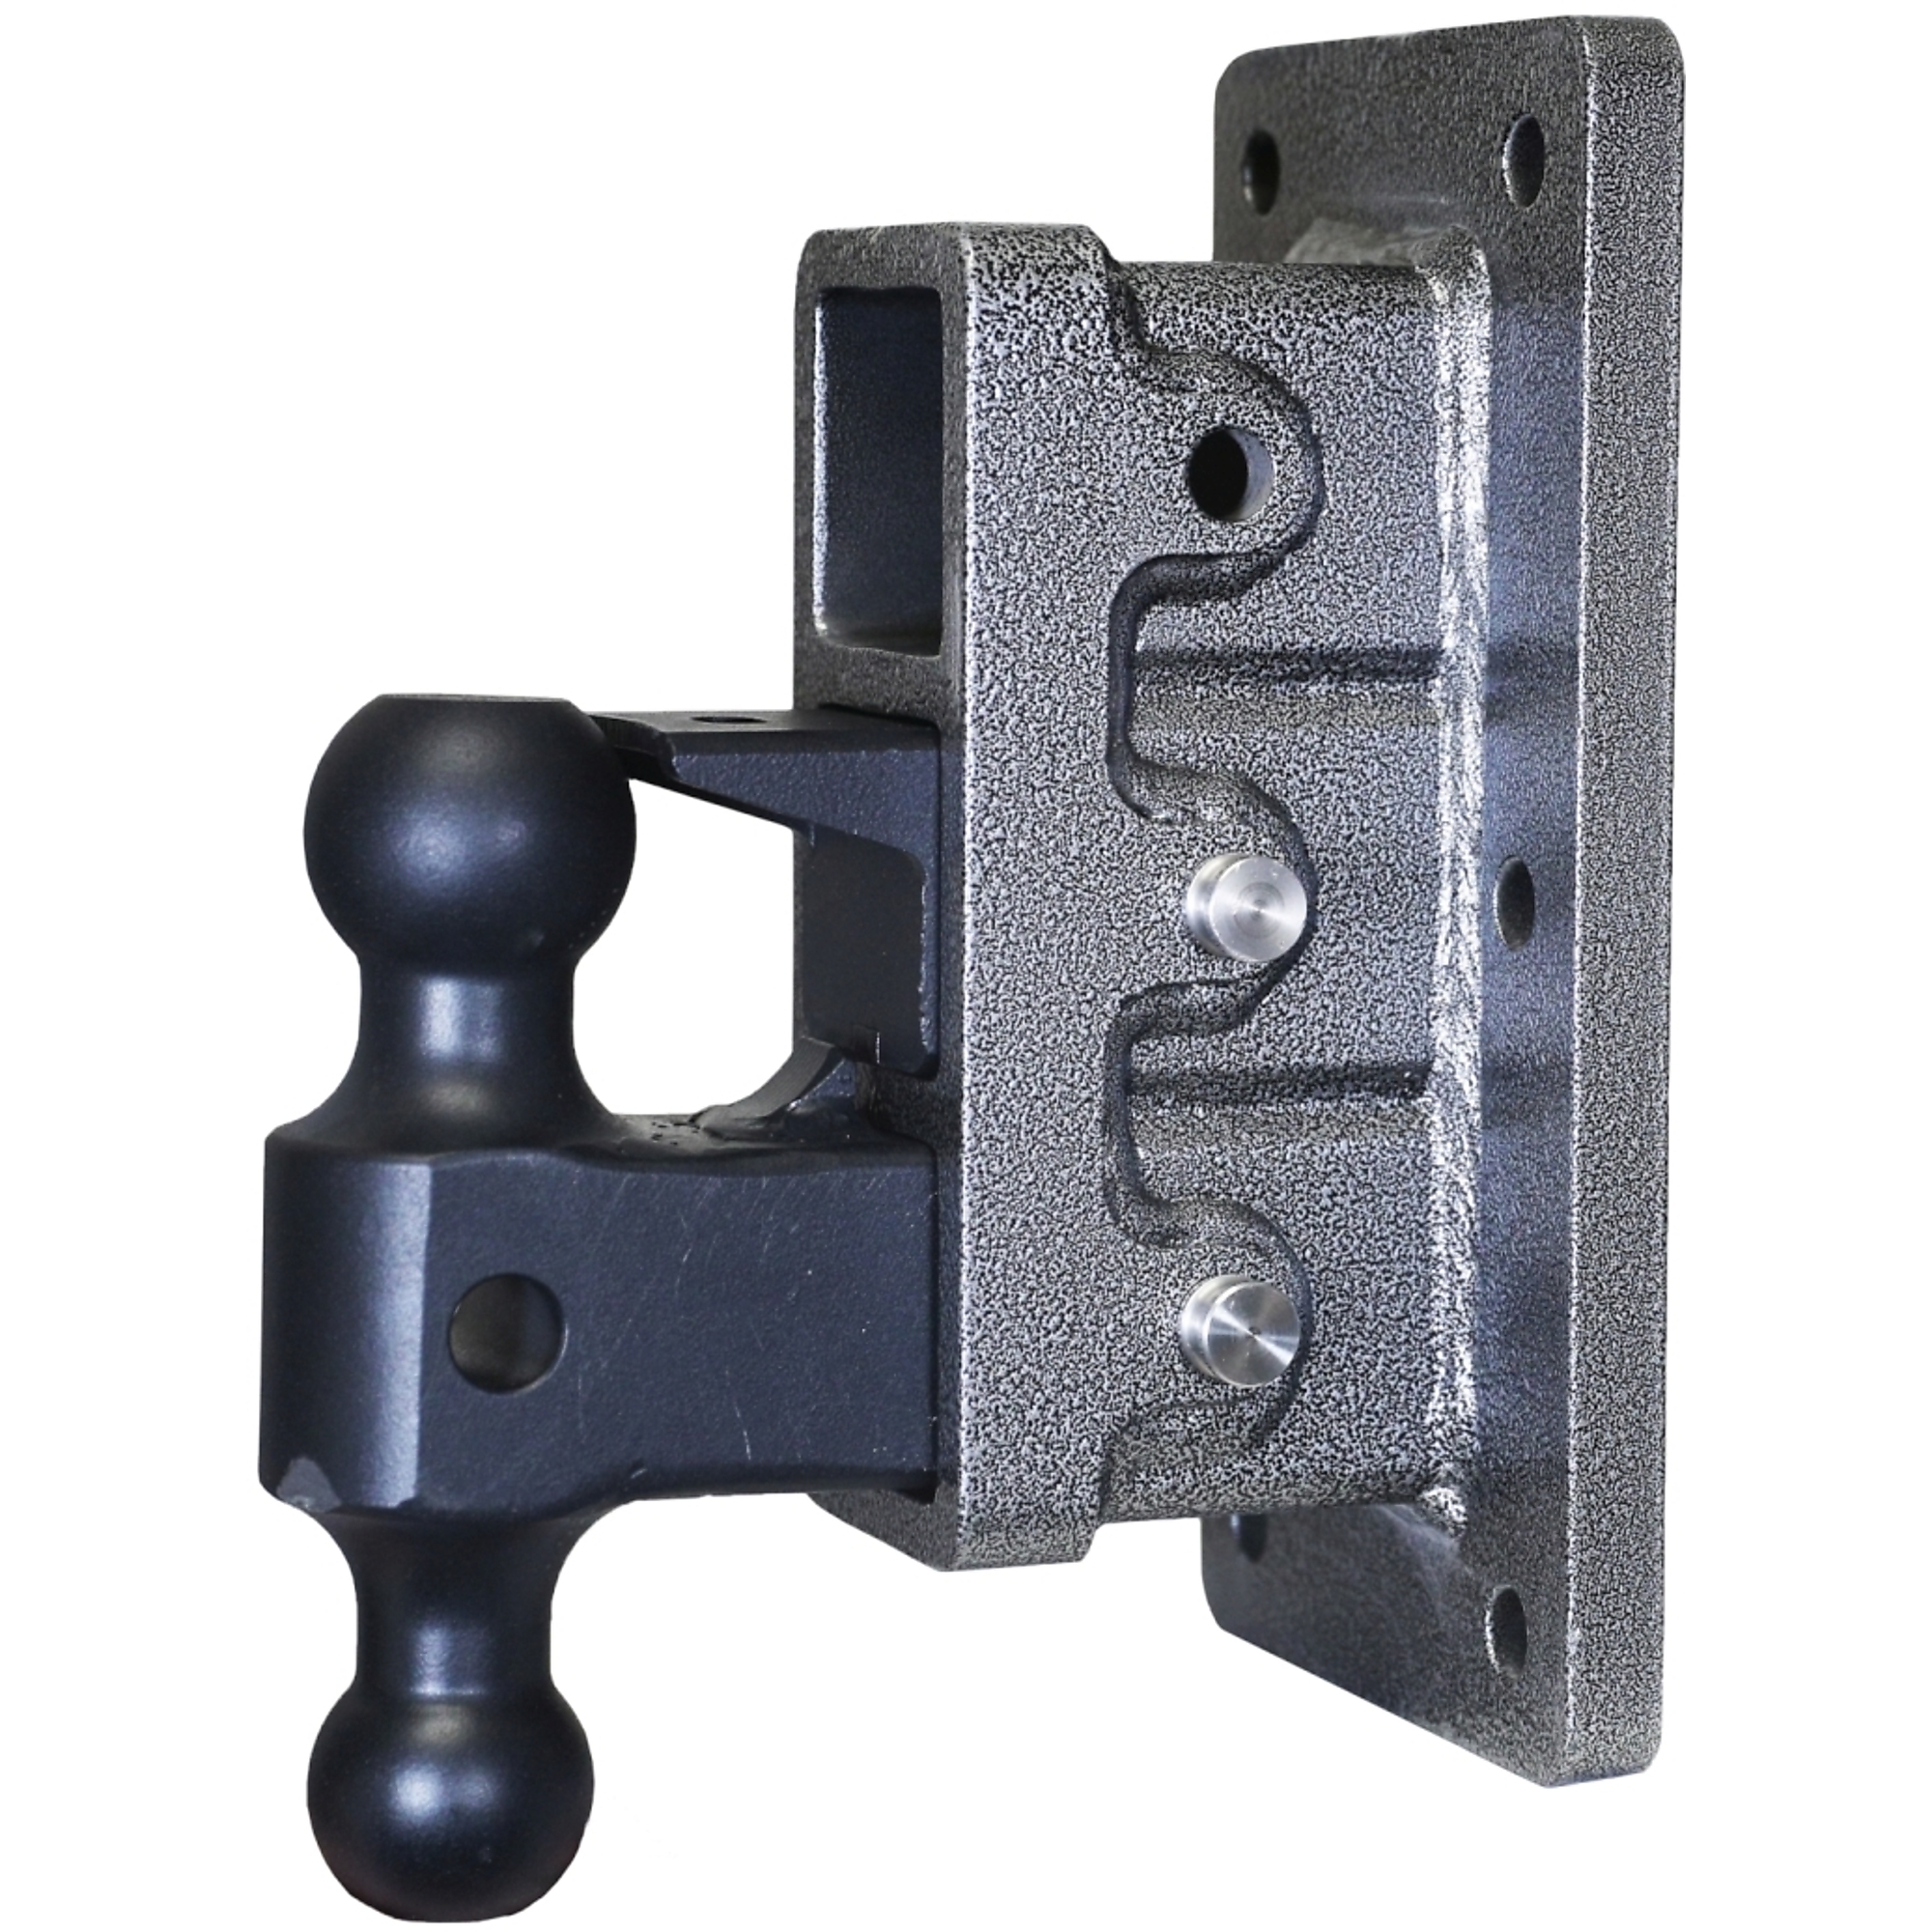 Gen-Y Hitch, MD 2.5 6Inch Drop, Gross Towing Weight 21000 lb, Ball Diameter Multiple in, Class Rating N/A, Model GH-723